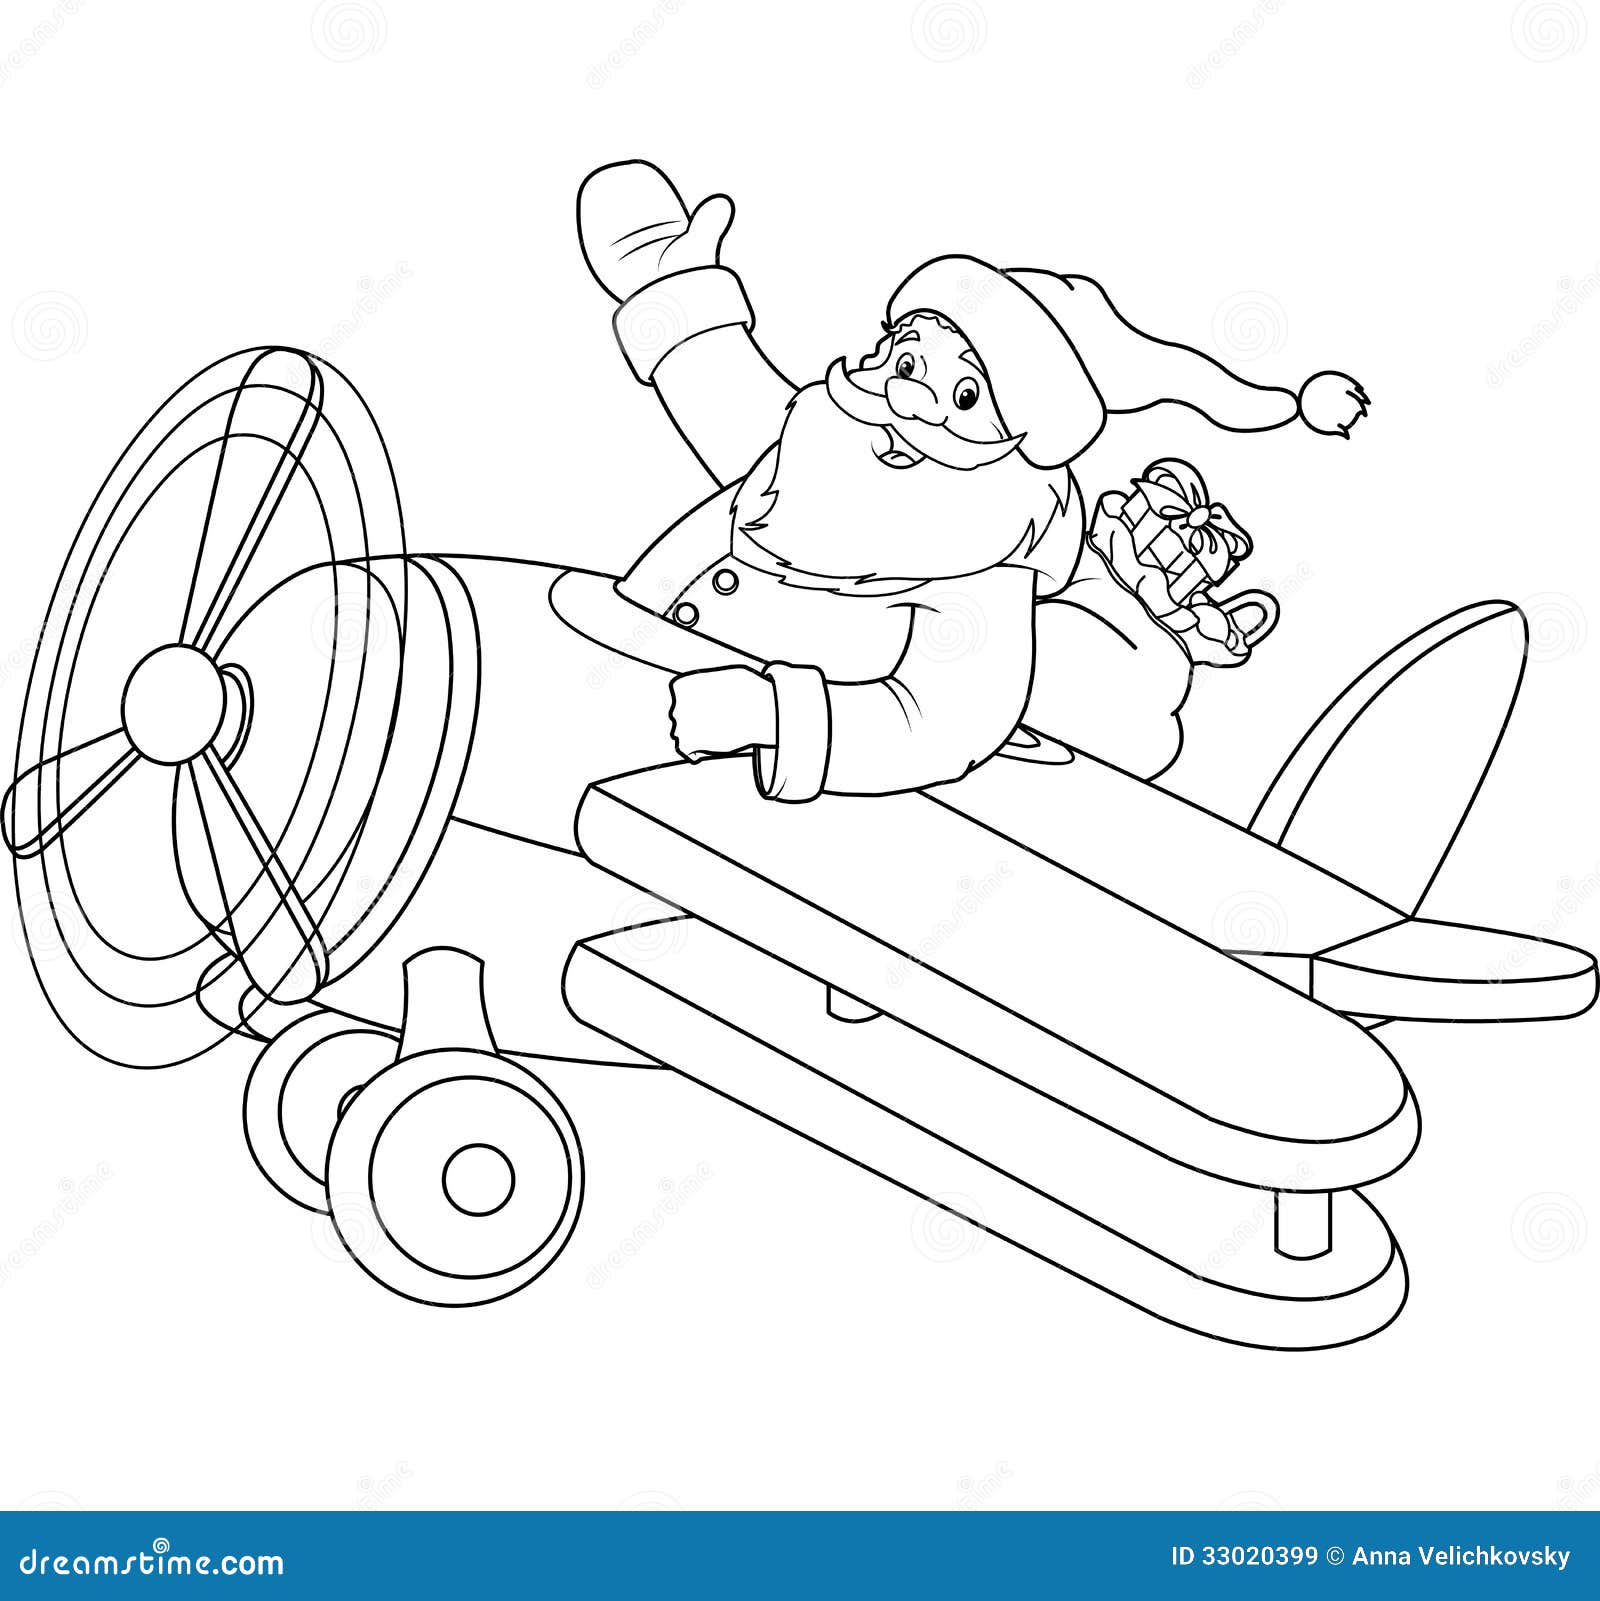 Download Santa On The Plane Coloring Page Stock Vector ...